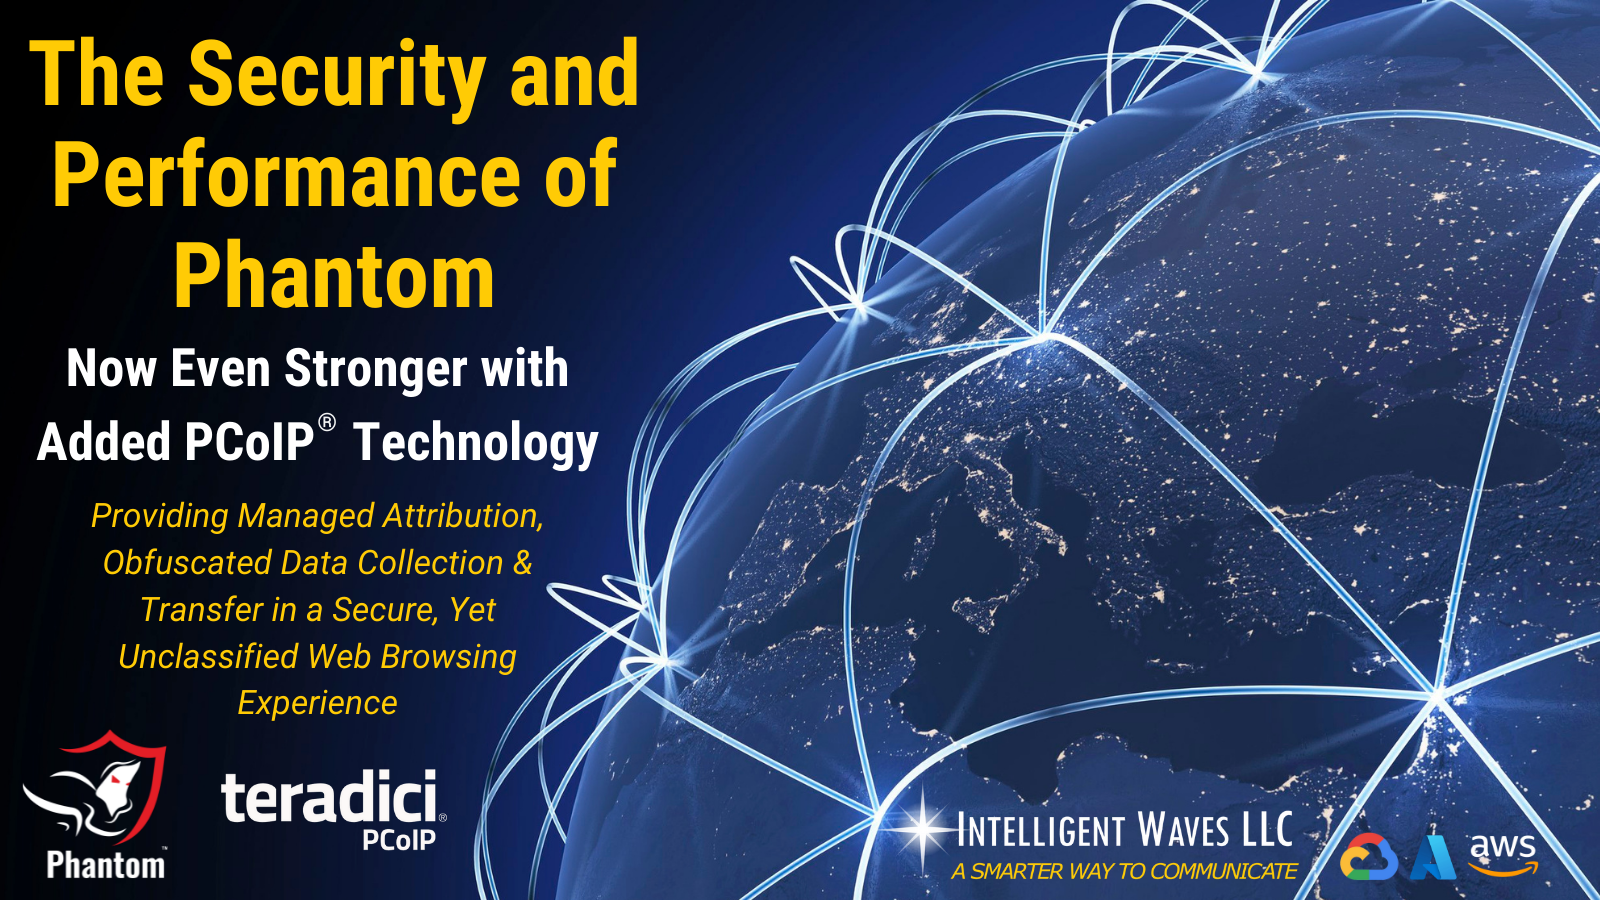 Intelligent Waves Integrates Teradici PCoIP® Technology to Optimize Phantom, Its Award-Winning Cyber-Defense Solution for Ultra-Secure Communications